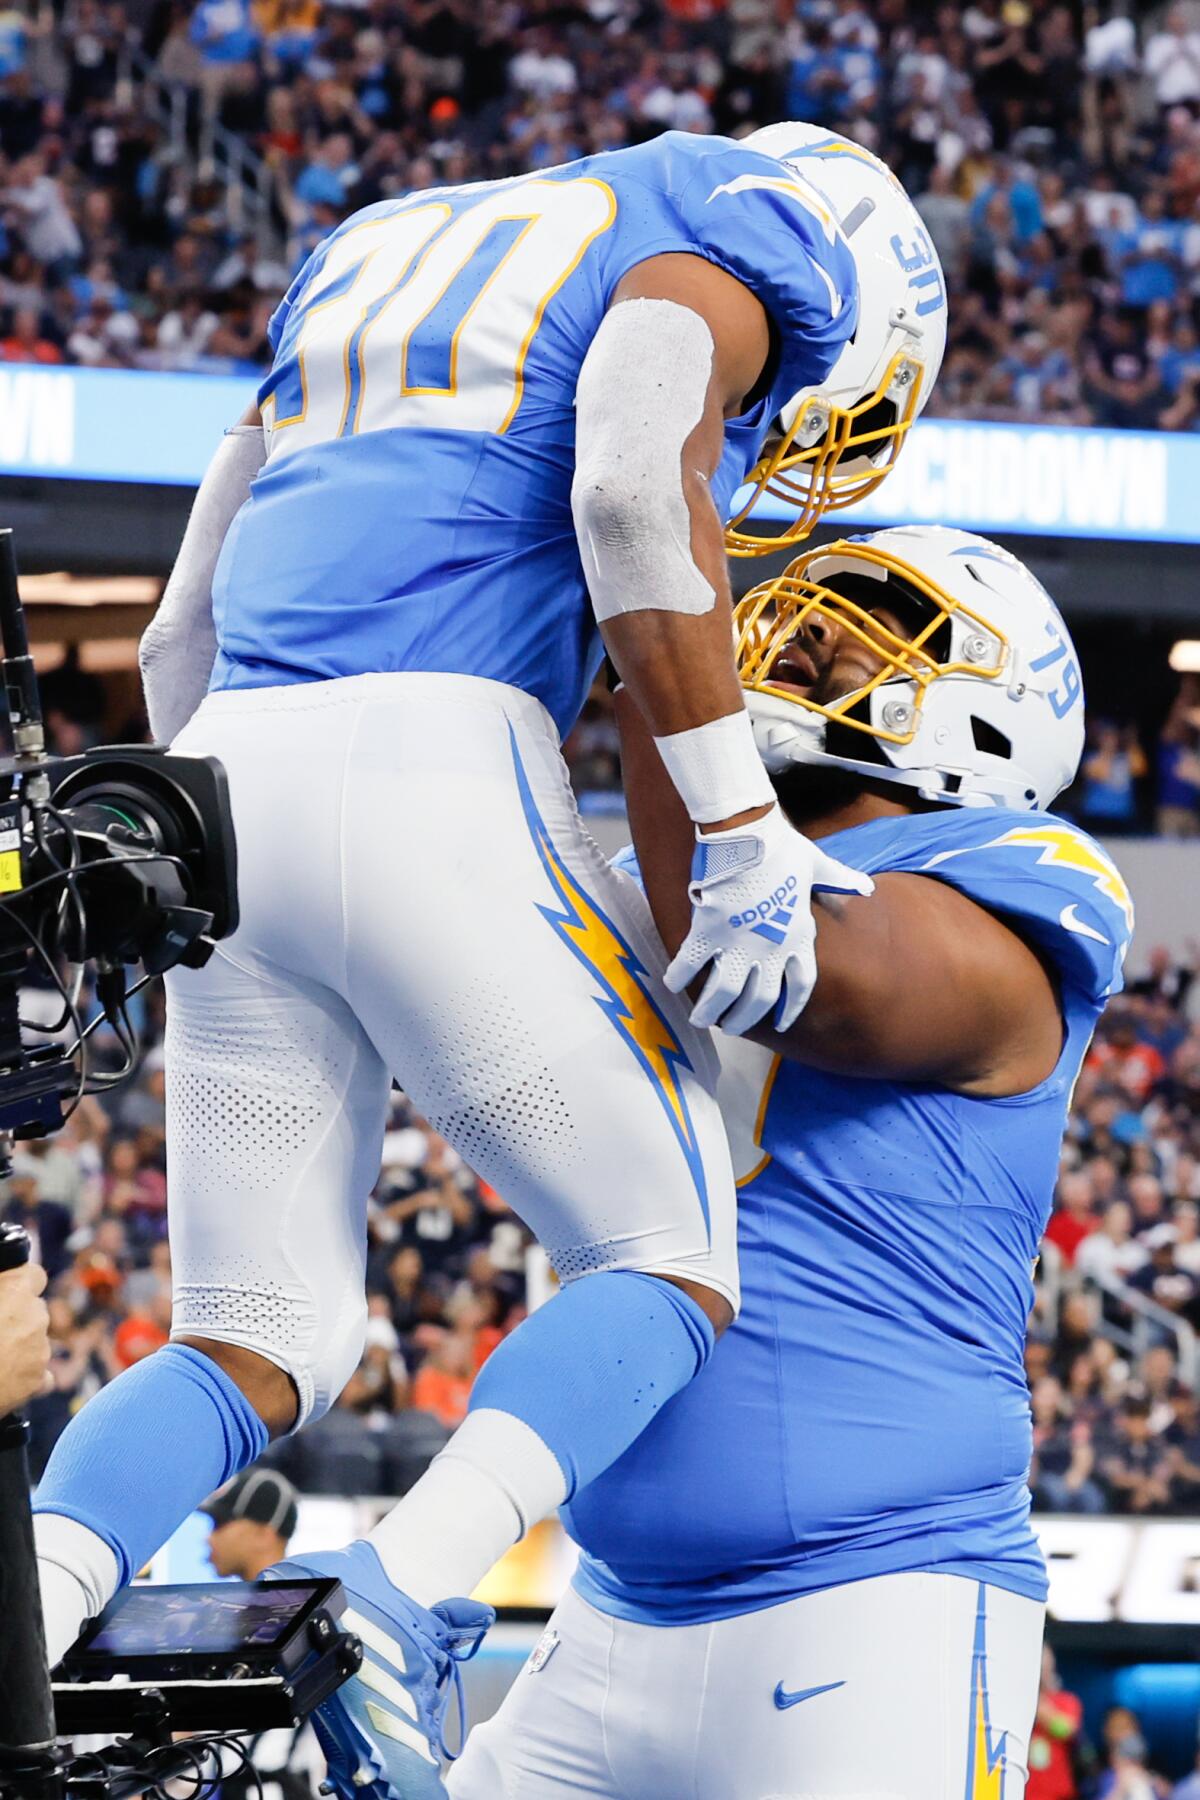 The Chargers' Trey Pipkins III (79) celebrates a 39-yard touchdown reception by Austin Ekeler (30) against the Bears.